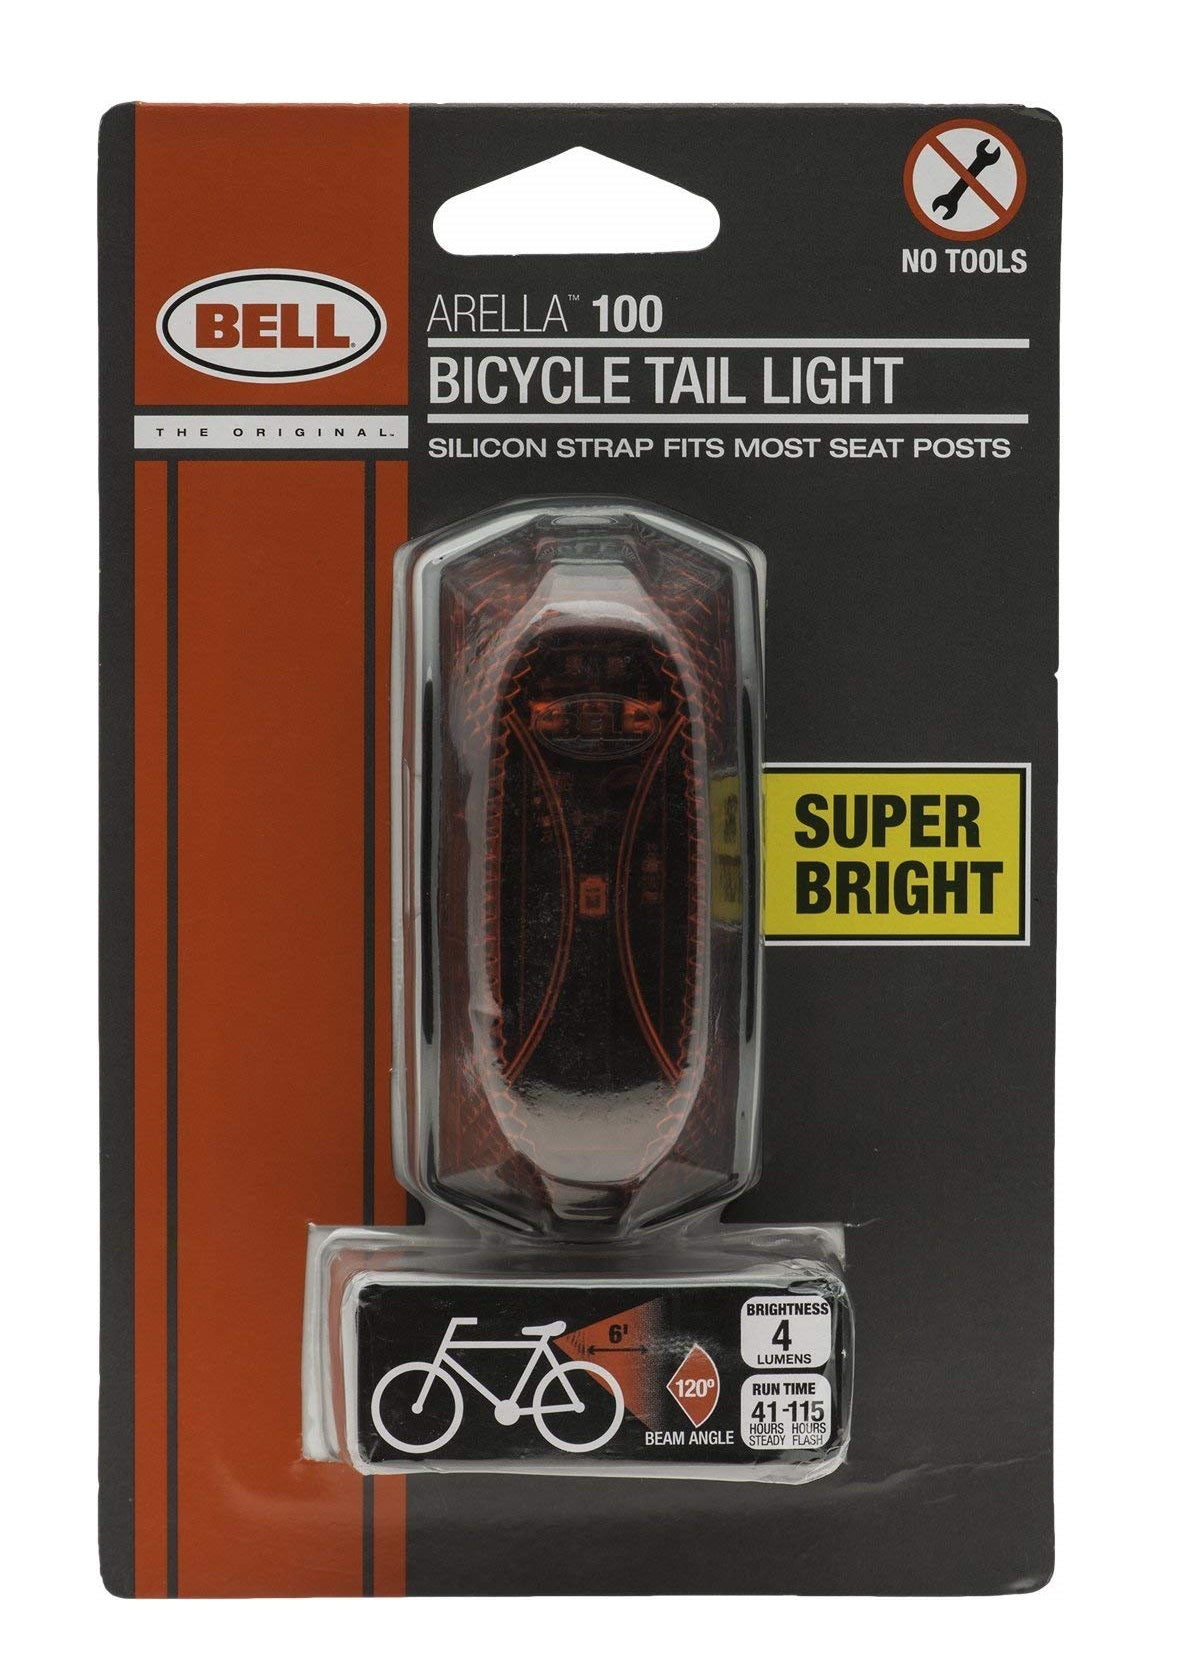 buy bike parts, accessories & sporting goods at cheap rate in bulk. wholesale & retail sporting supplies store.